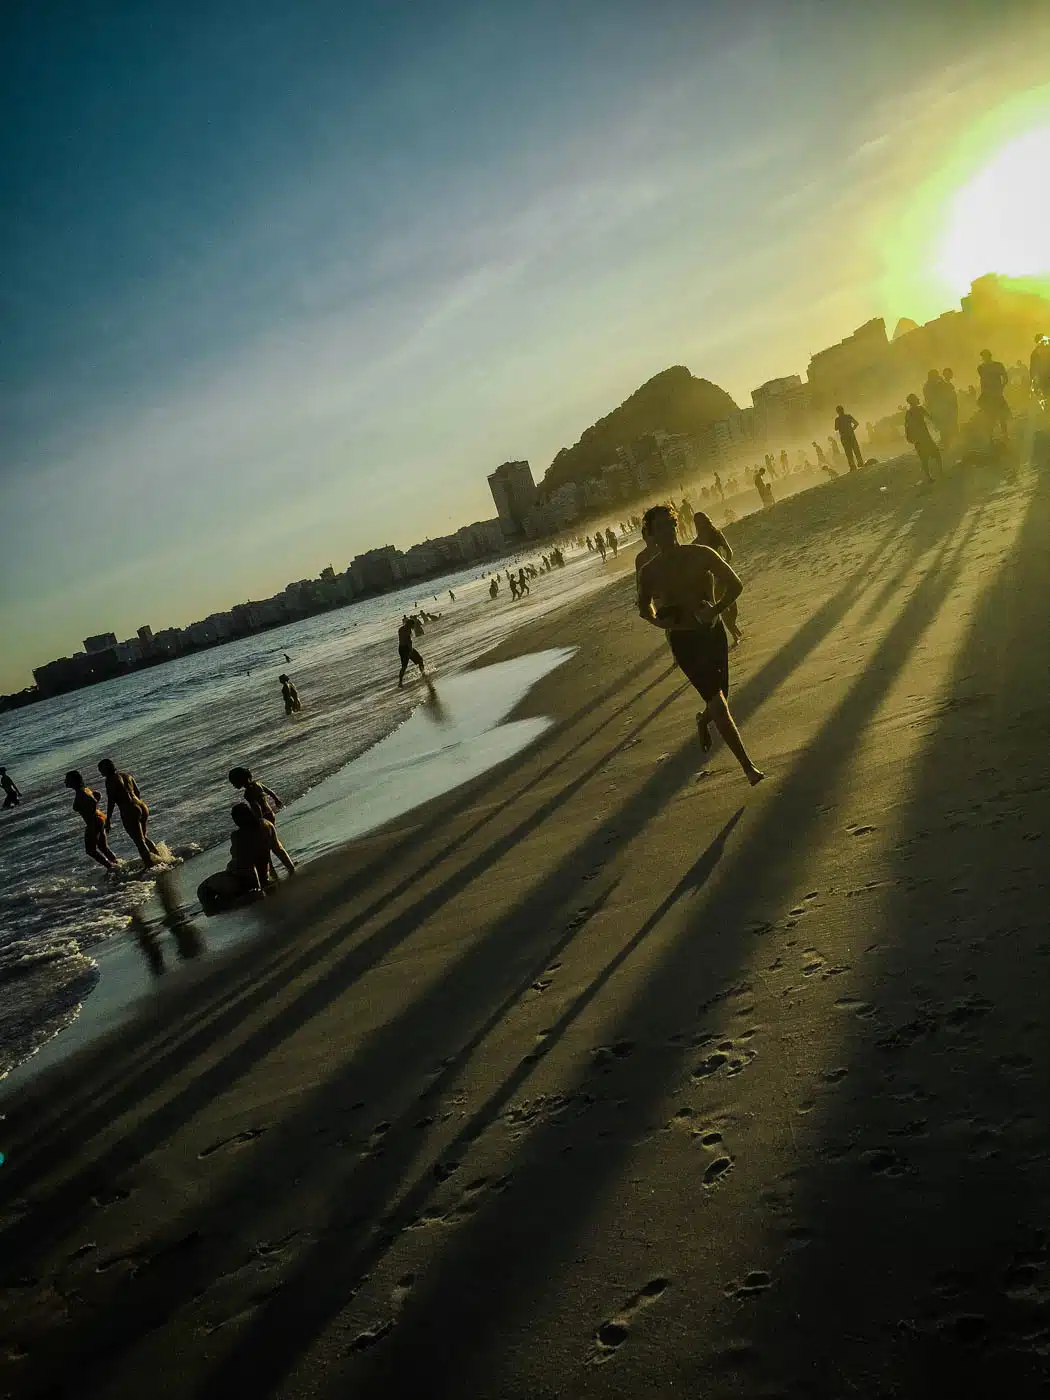 Ipanema Beach I South America Travel Bucket List. 90 Awesome Things to do in South America When Backpacking and Travelling #southamerica #bucketlist #traveldestinations